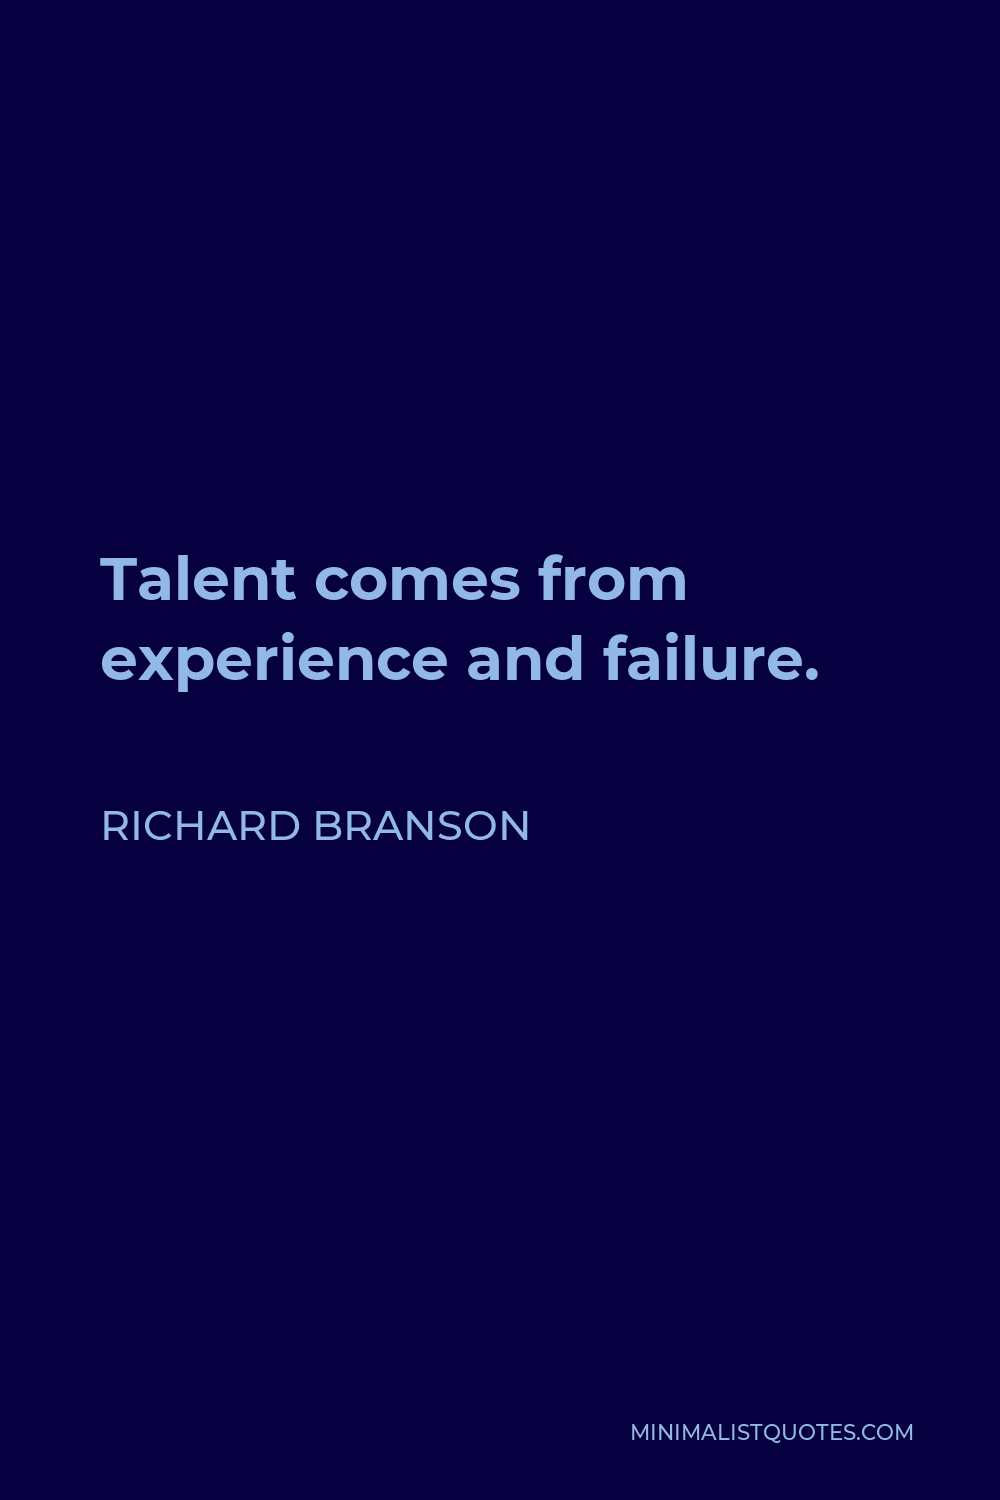 Richard Branson Quote - Talent comes from experience and failure.